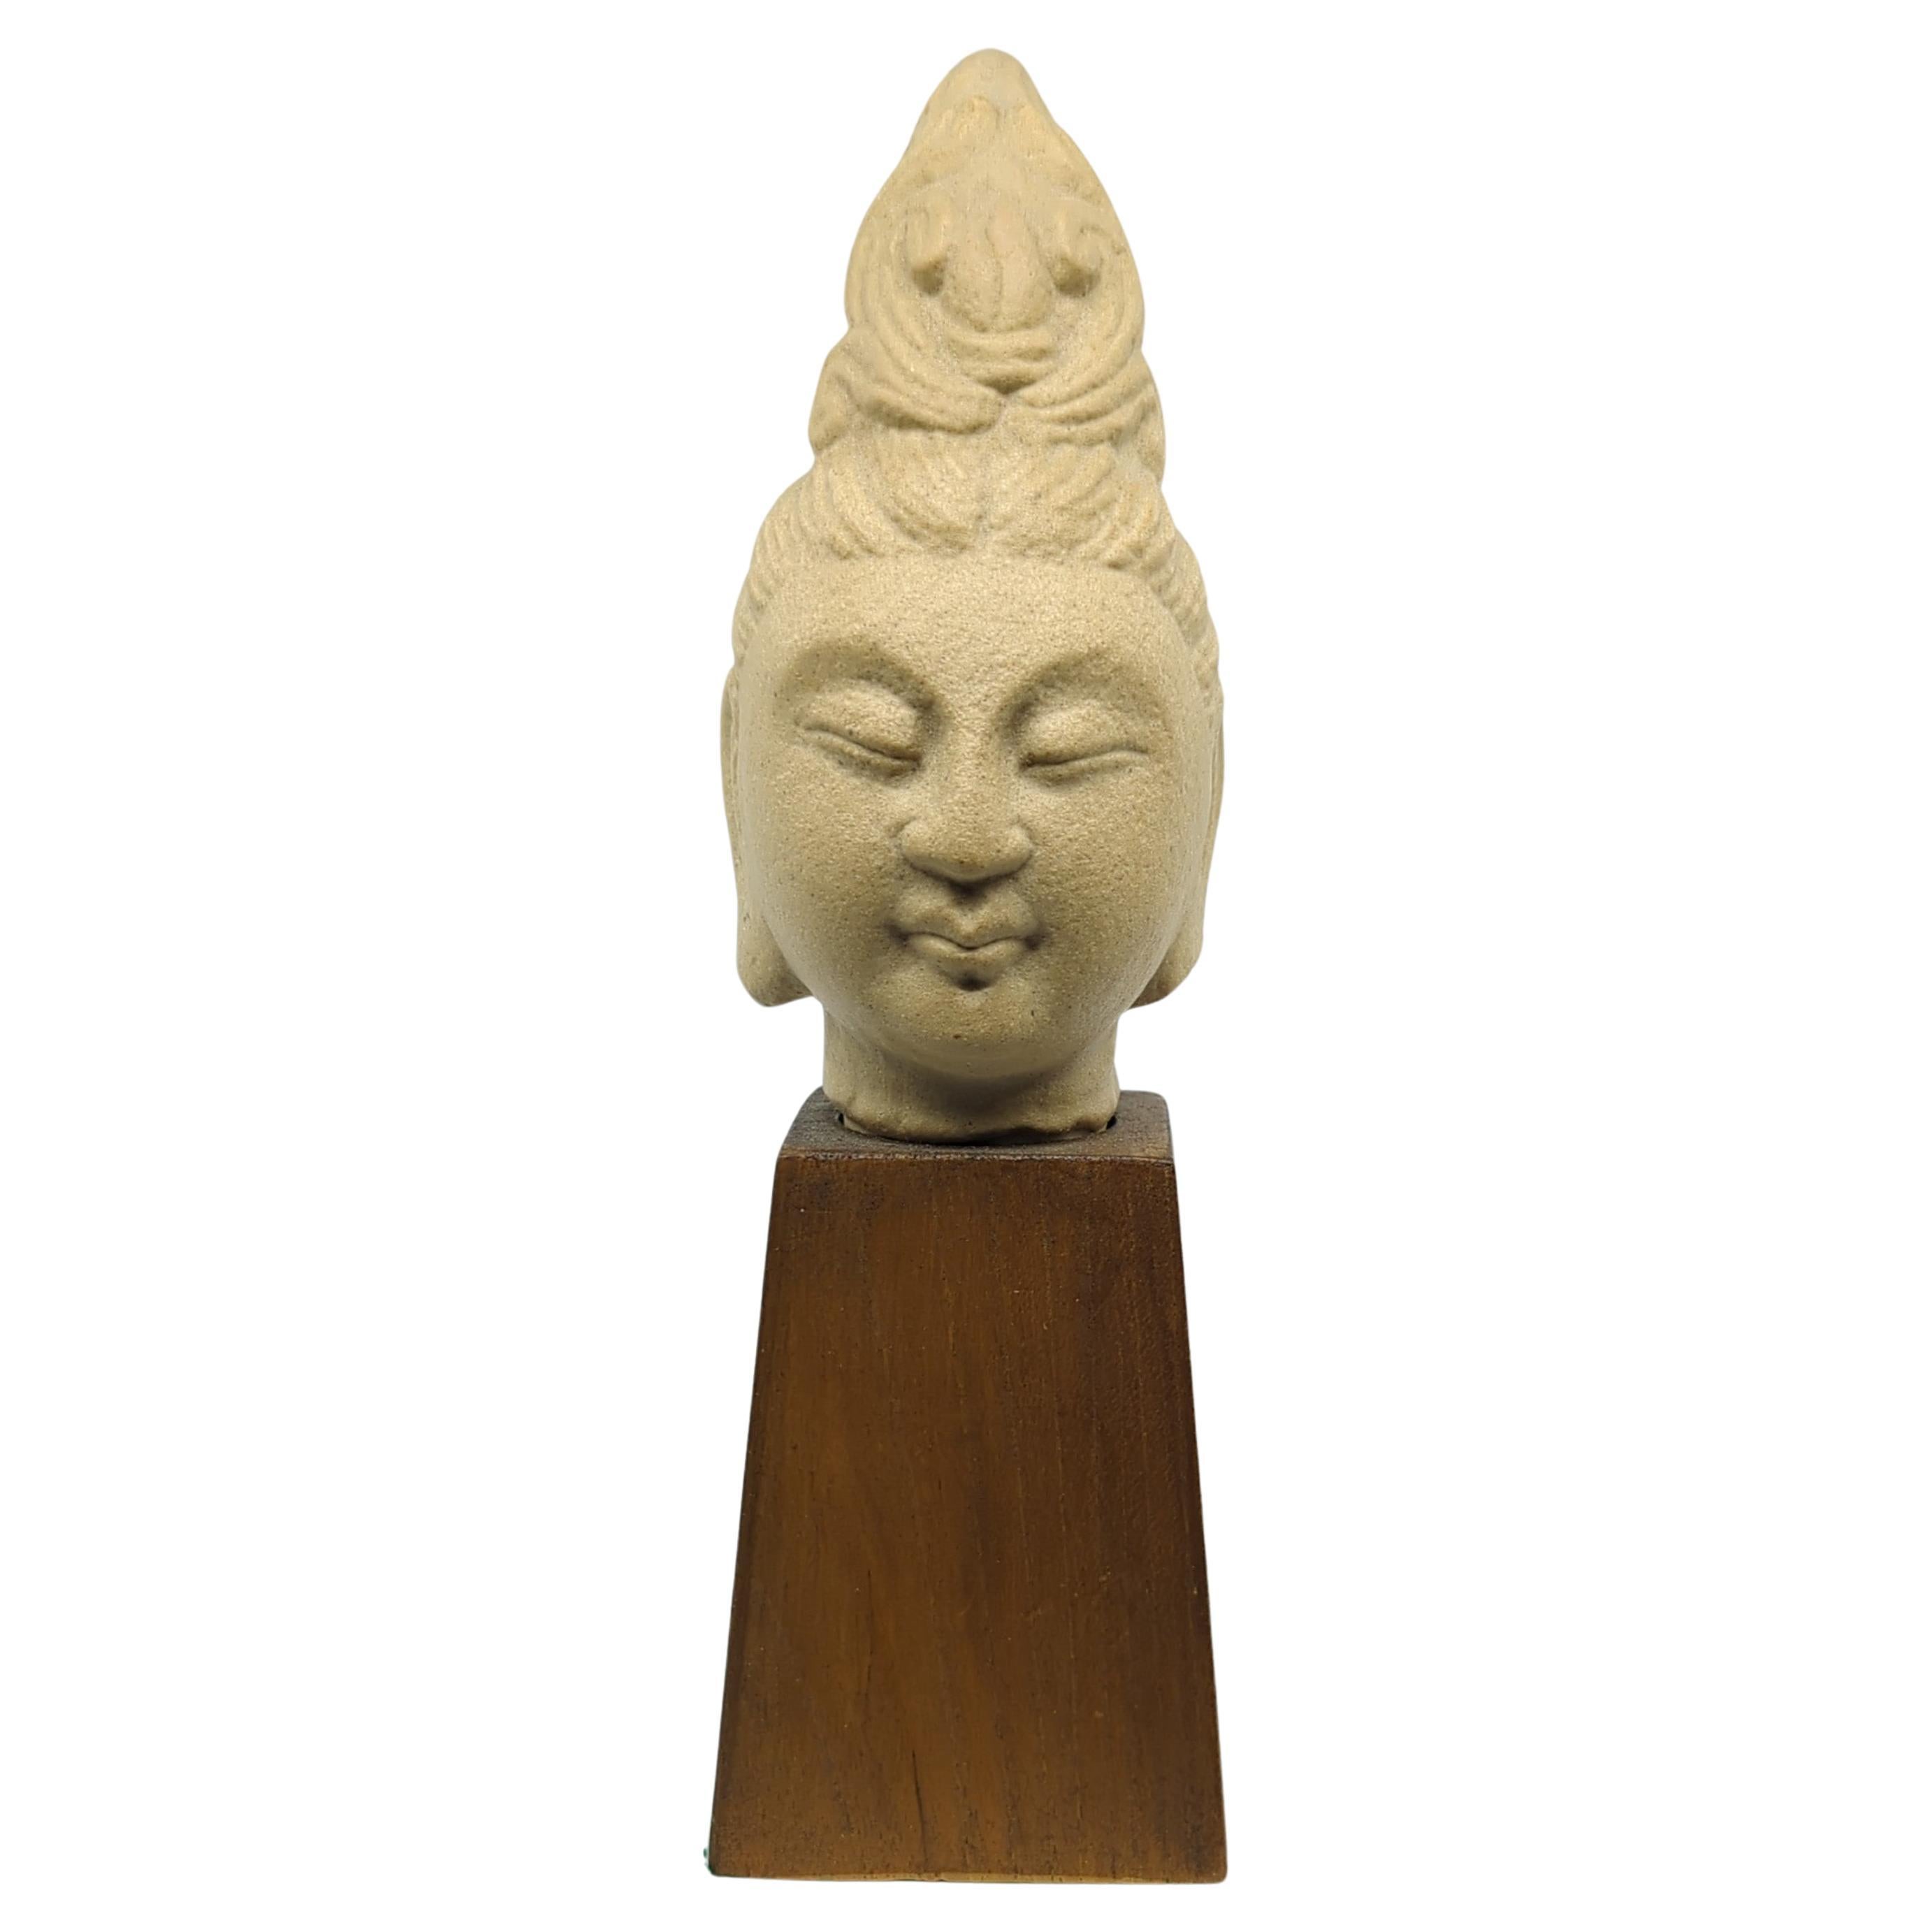 This Chinese ceramic bust of Kwan Yin (Guanyin), the revered bodhisattva of compassion in Buddhist tradition, is a beautifully crafted representation of spiritual serenity and grace. The bust captures the essence of Kwan Yin's compassionate and